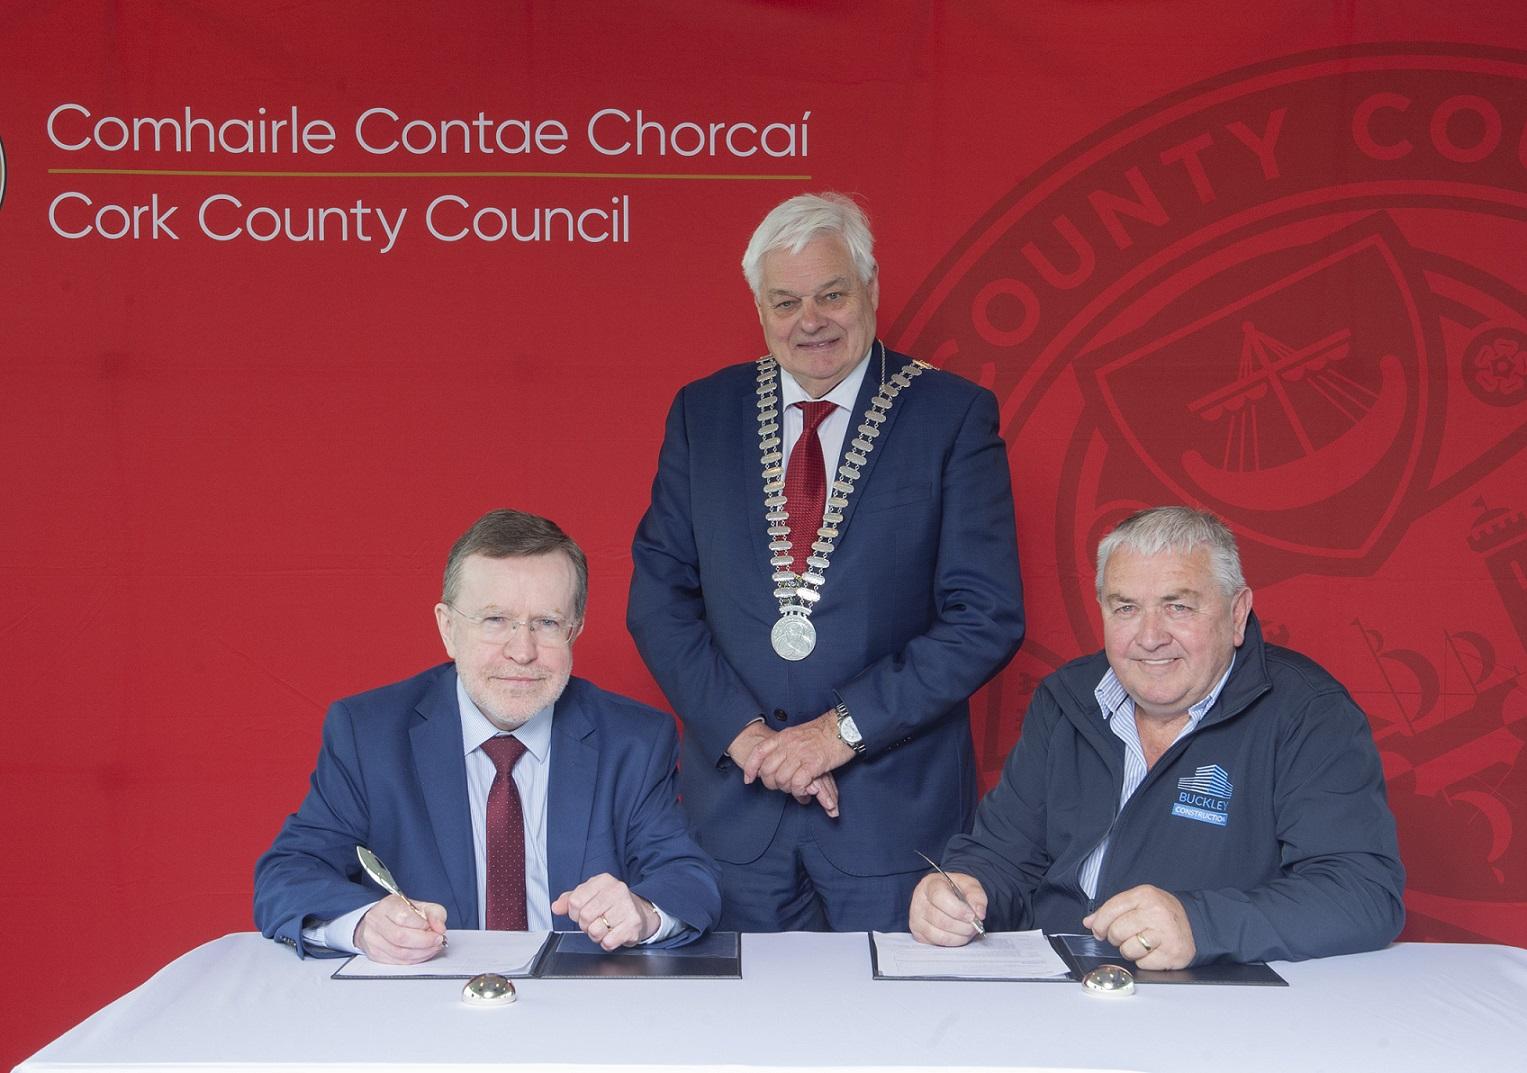 Kevin Morey, Divisional Manager North Cork, Cork County Council, Mayor of the County of Cork, Cllr. Frank O’Flynn and John Buckley, J.D. Buckley Construction Ltd. Cork County Council signing a contract.